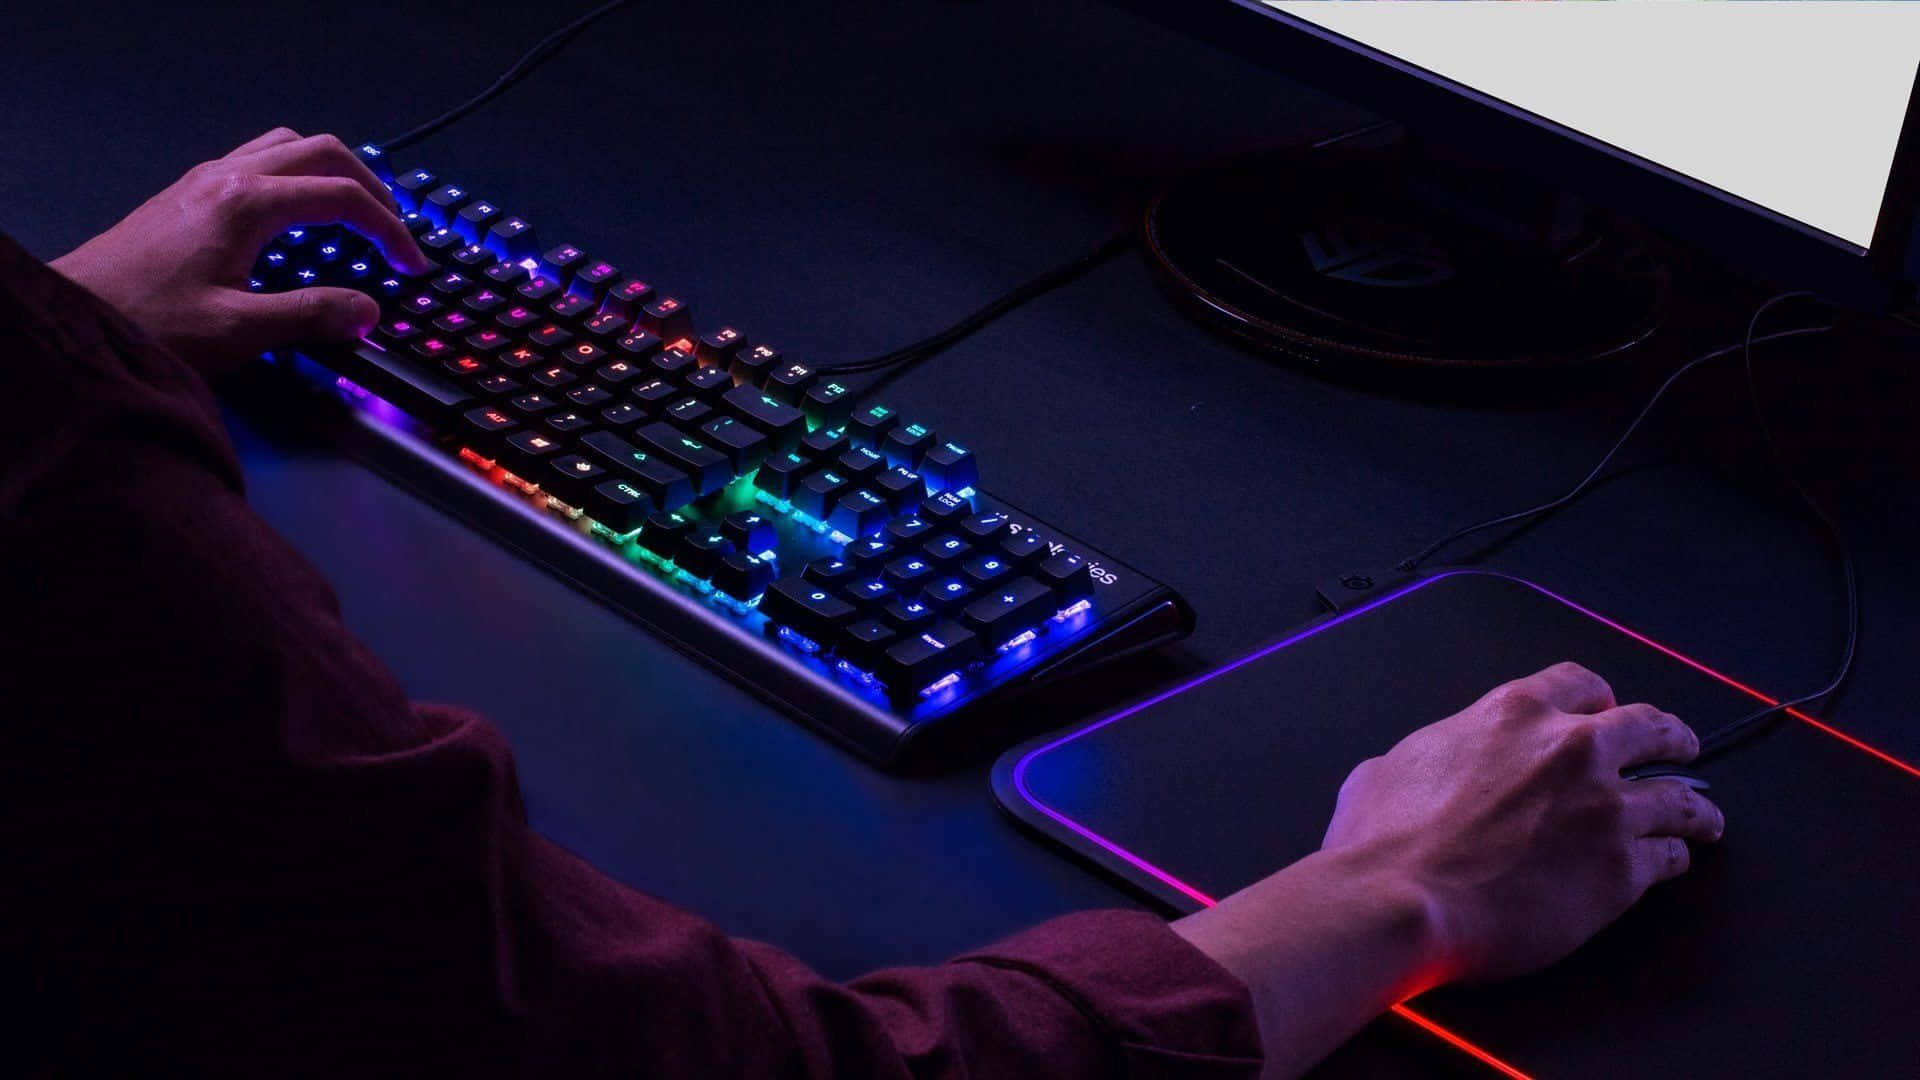 Check Out This Awesome Gaming Keyboard Wallpaper